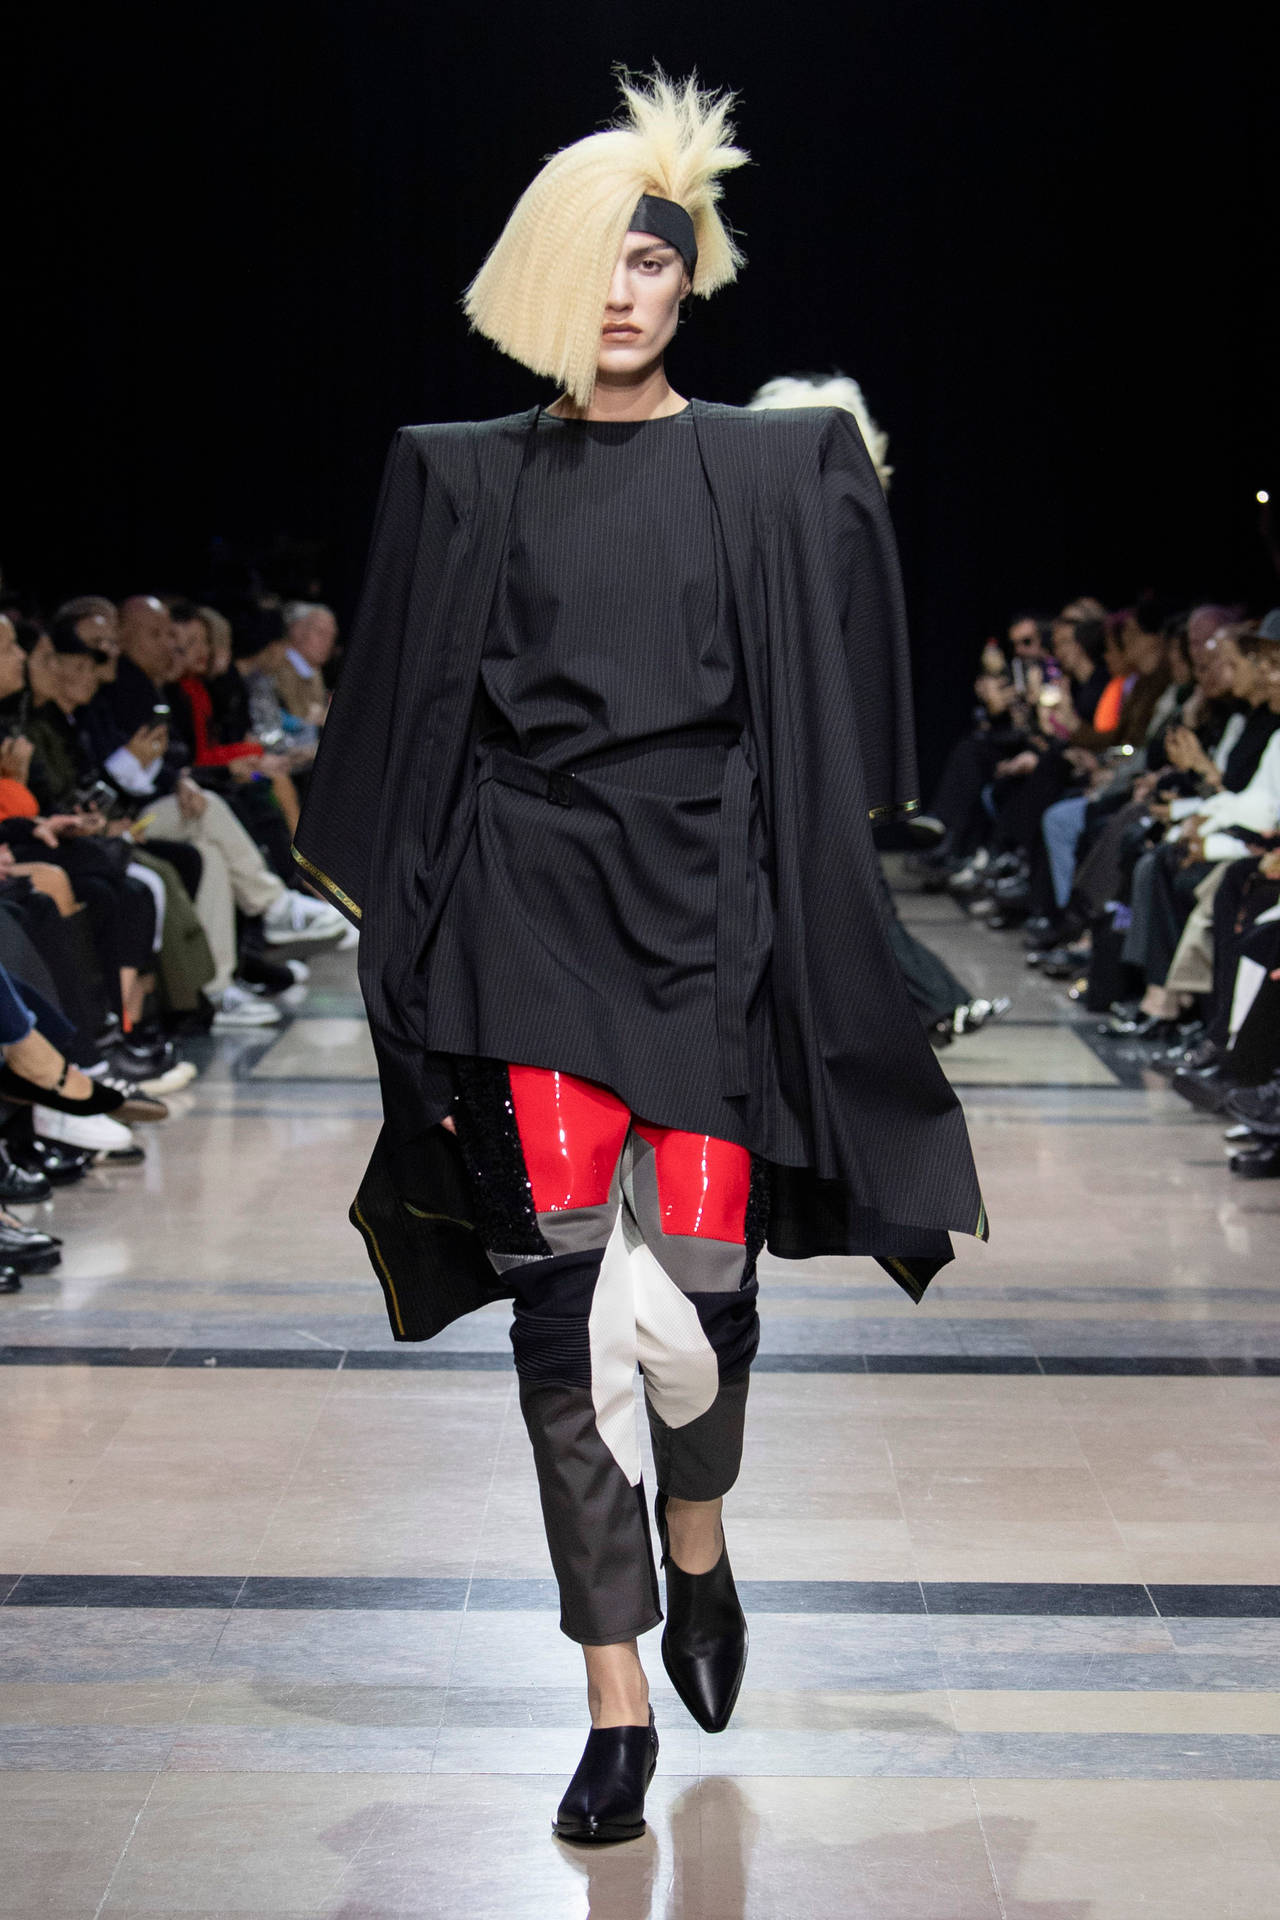 Black Outfit From Comme Des Garçons Background